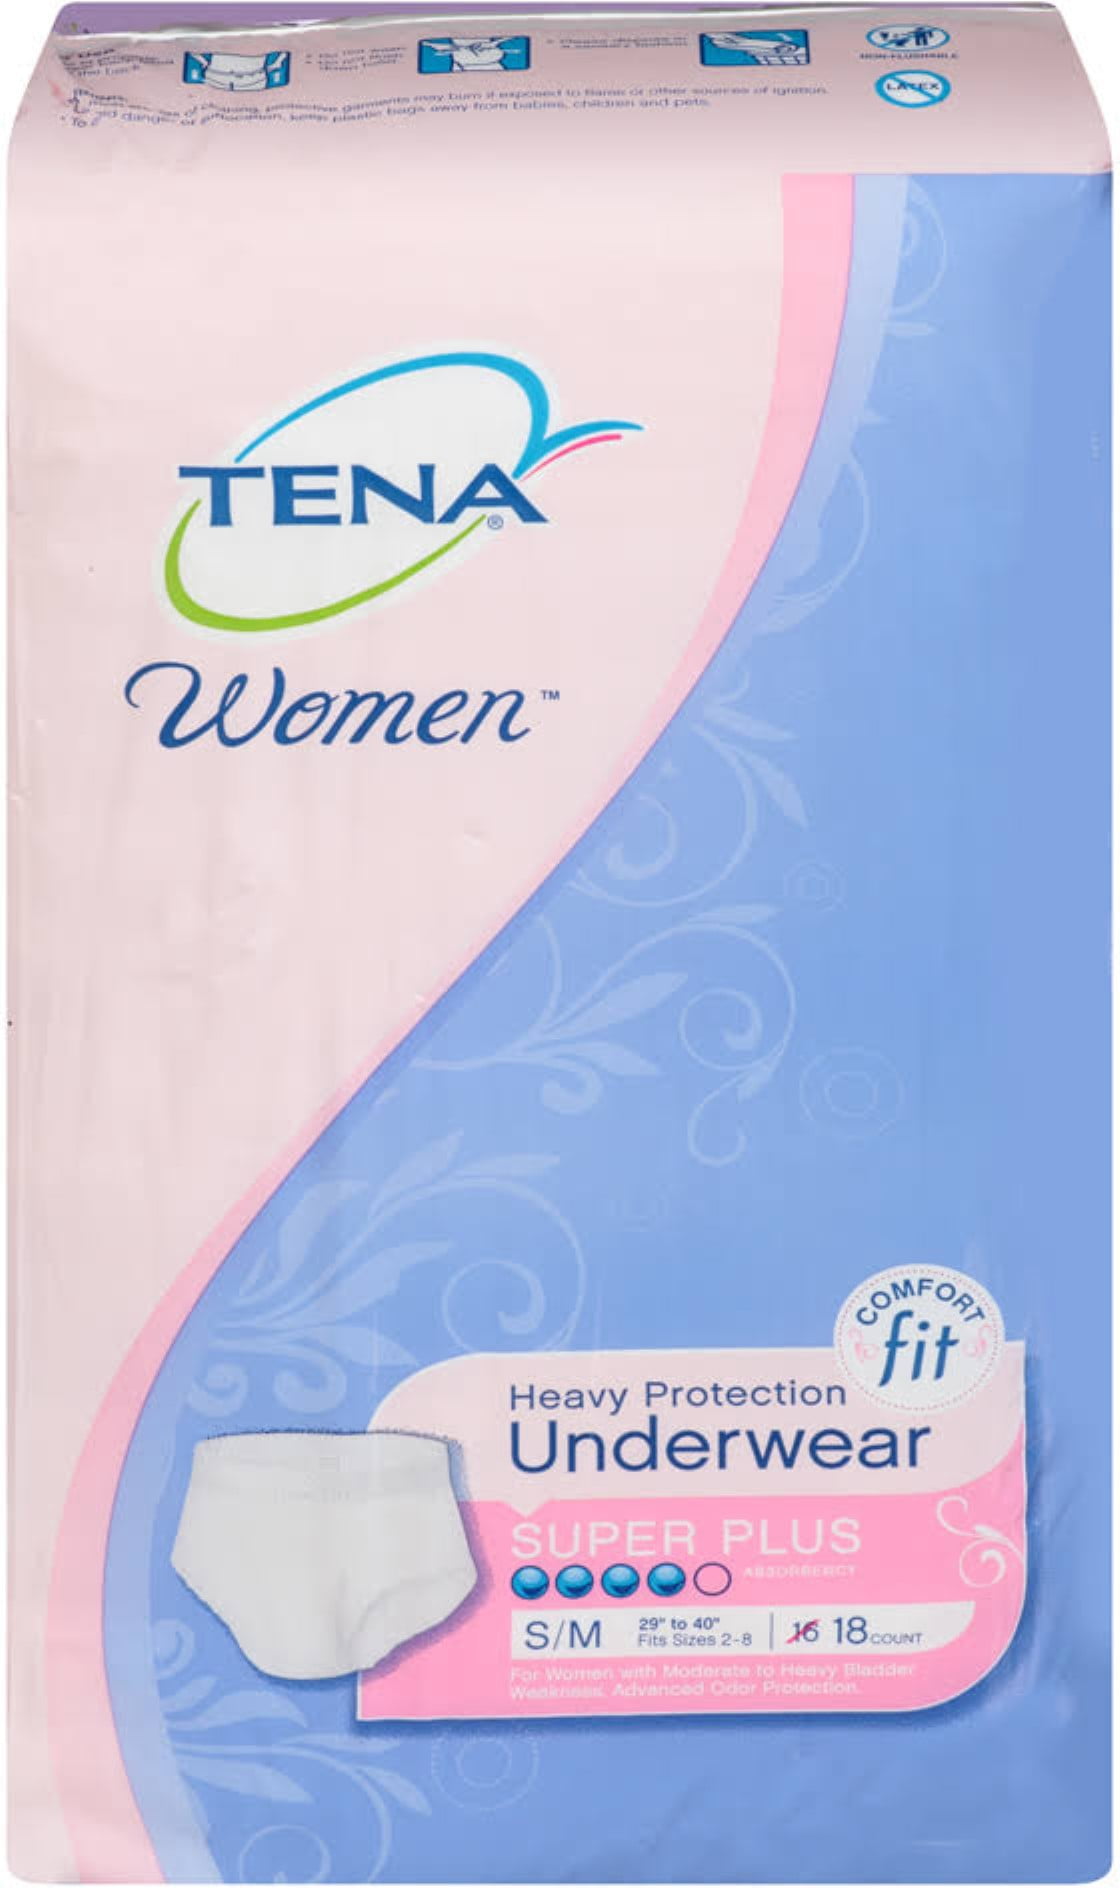 6 Pack - TENA for Women Heavy Protection Underwear, Super Plus ...